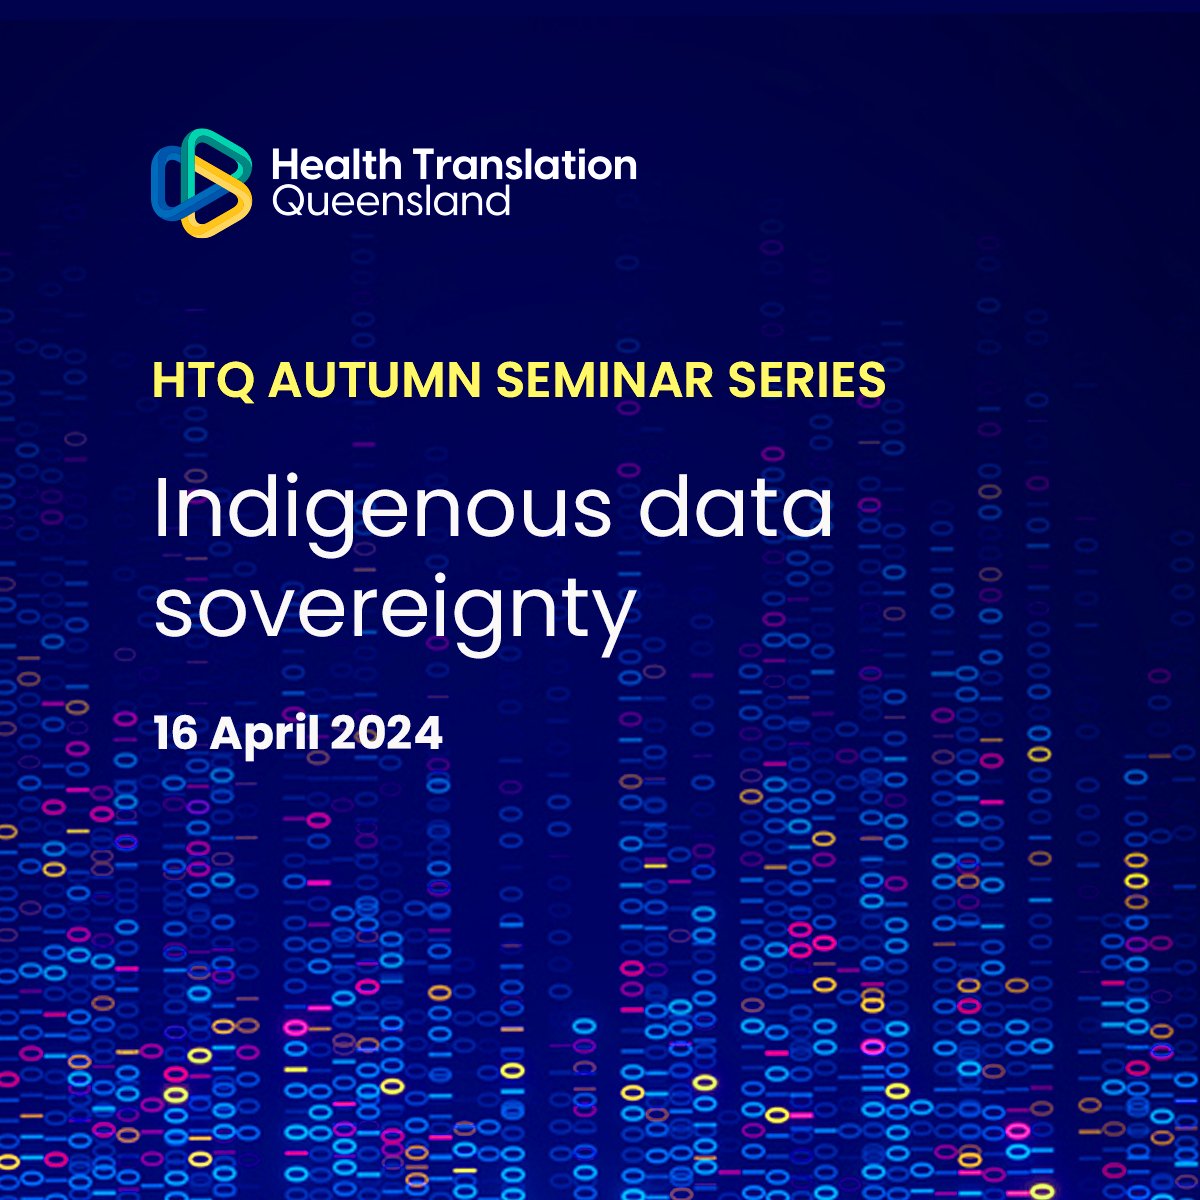 Don't miss our seminar on Indigenous data sovereignty in health research, led by Neane Carter from Terri Janke Solicitors. Explore what it is and how to apply it. 16 April, 11am-12pm AEST-QLD, Online. Secure your spot: eventbrite.com.au/e/htq-seminar-…
#DataGovernance #HealthResearch